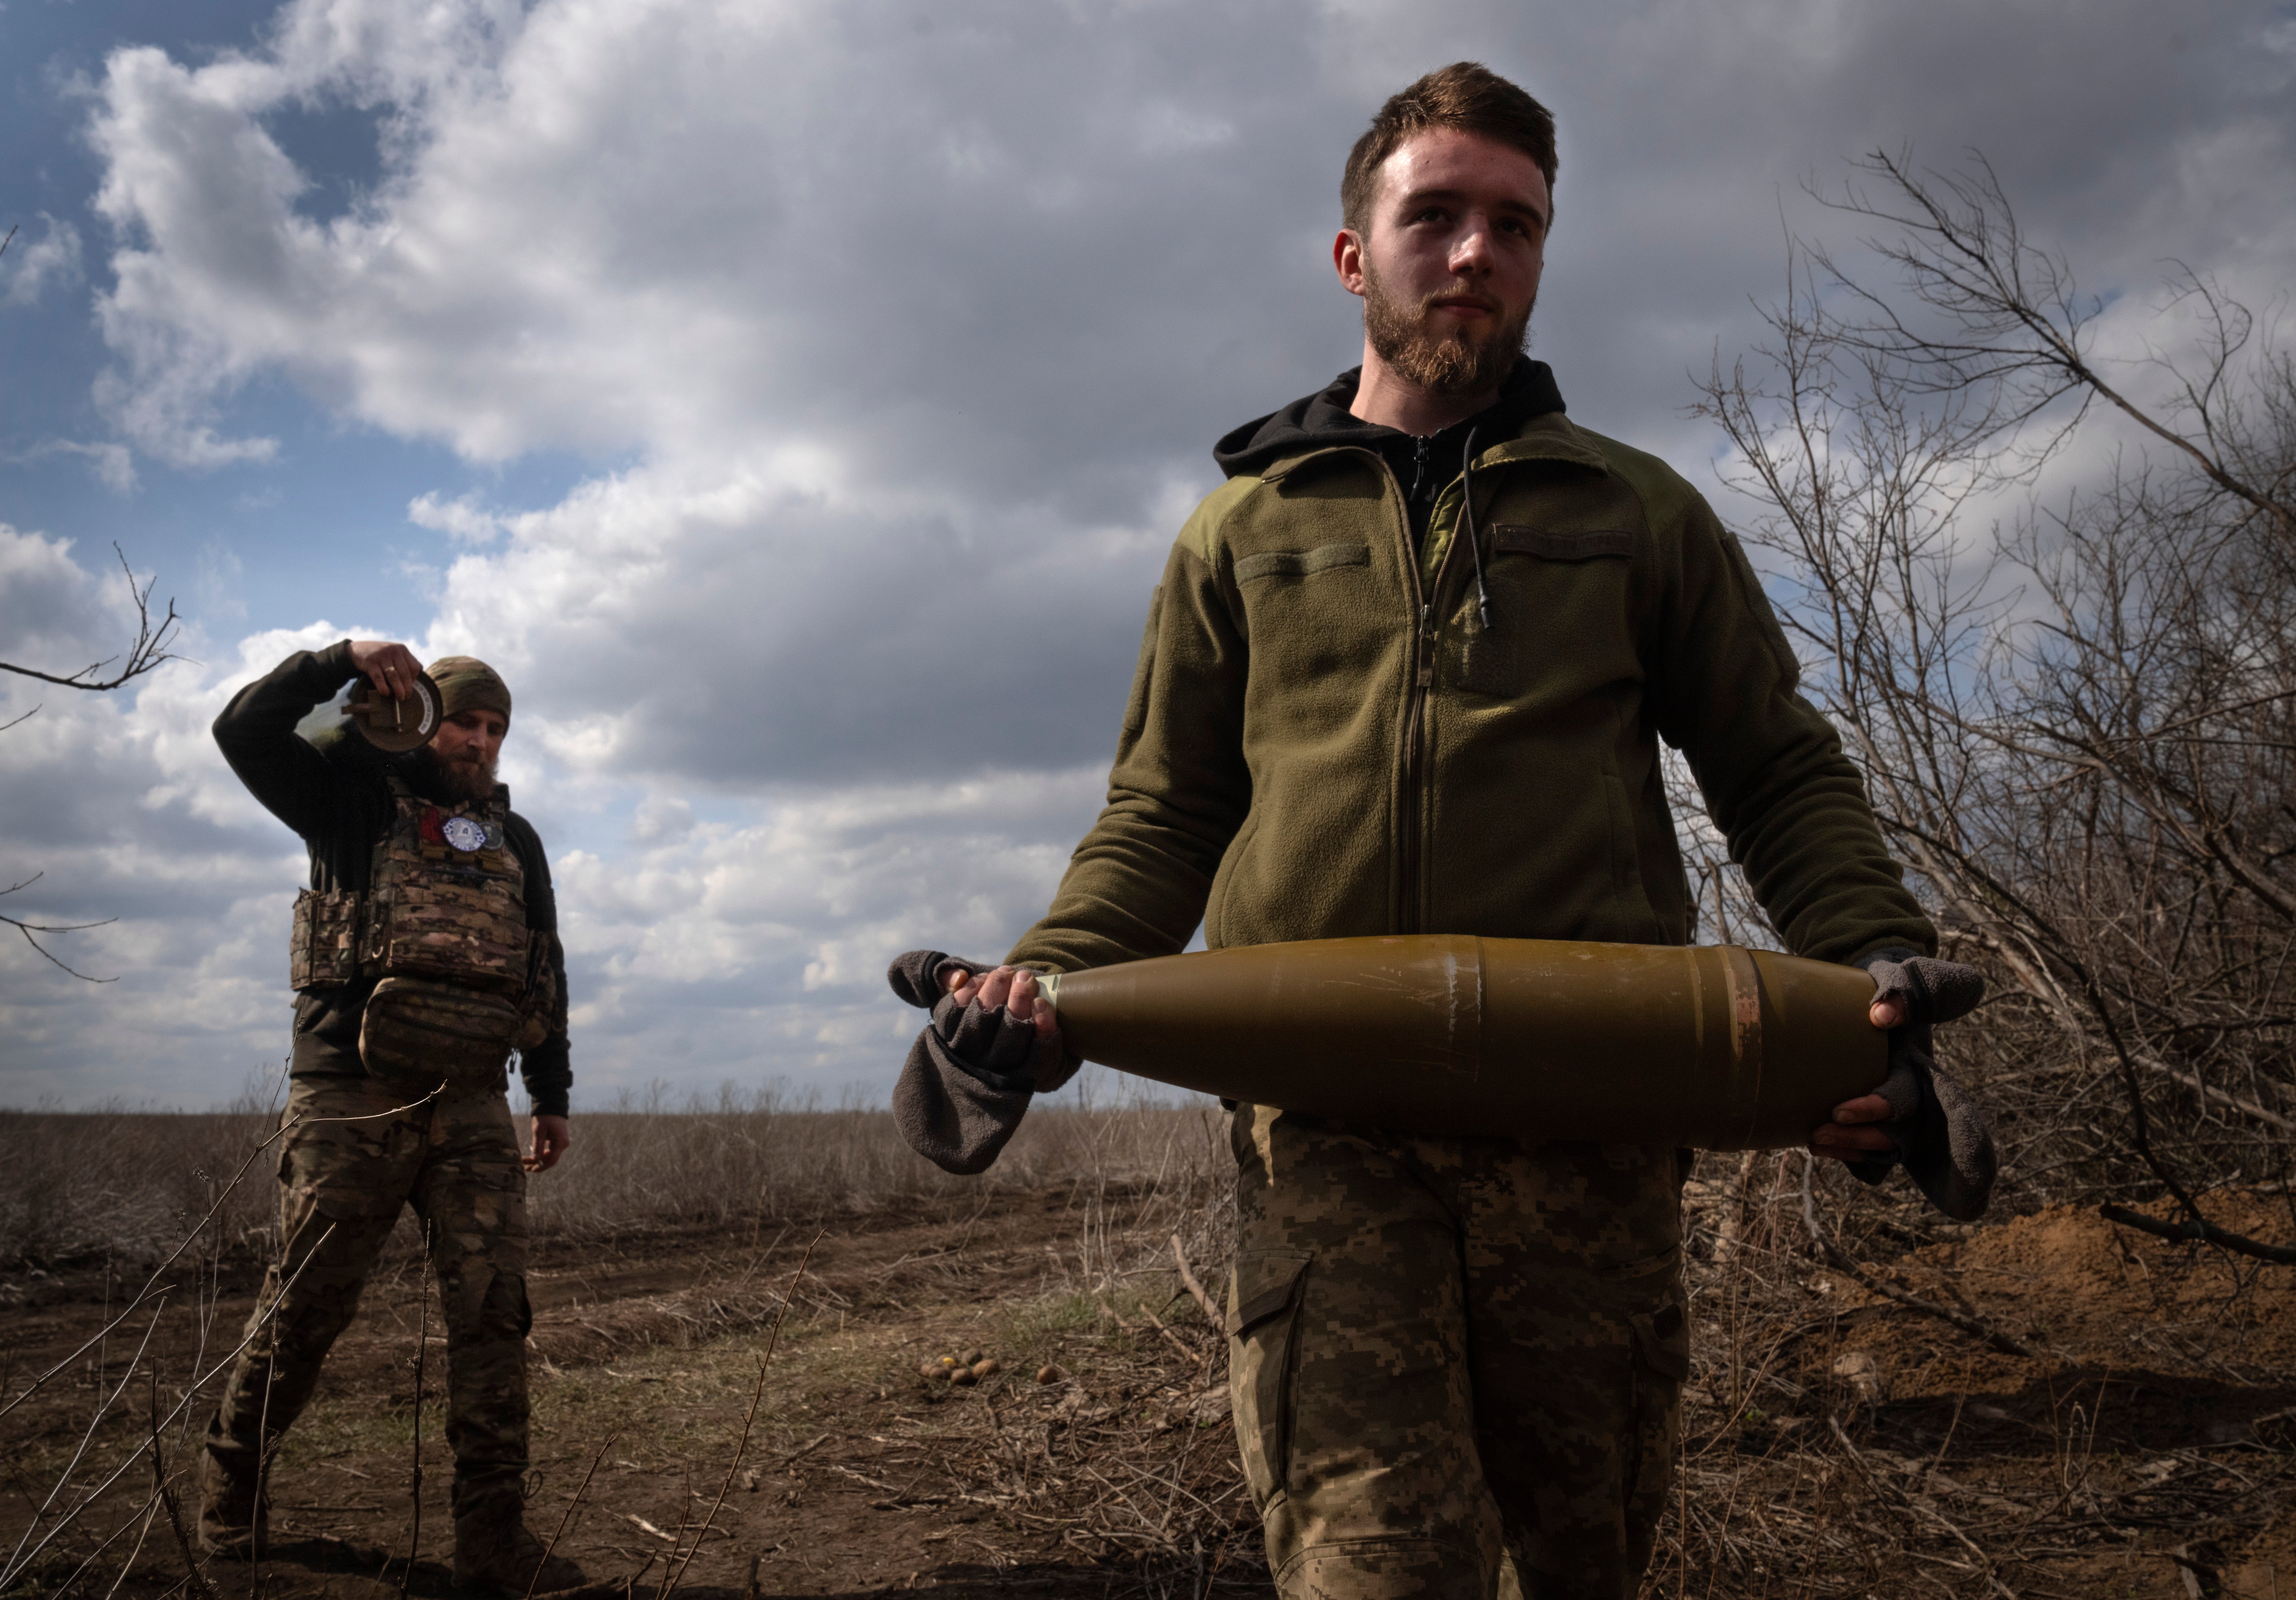 Ukrainian soldiers carry shells to fire towards Russian positions at the frontline, near Bakhmut, Donetsk region